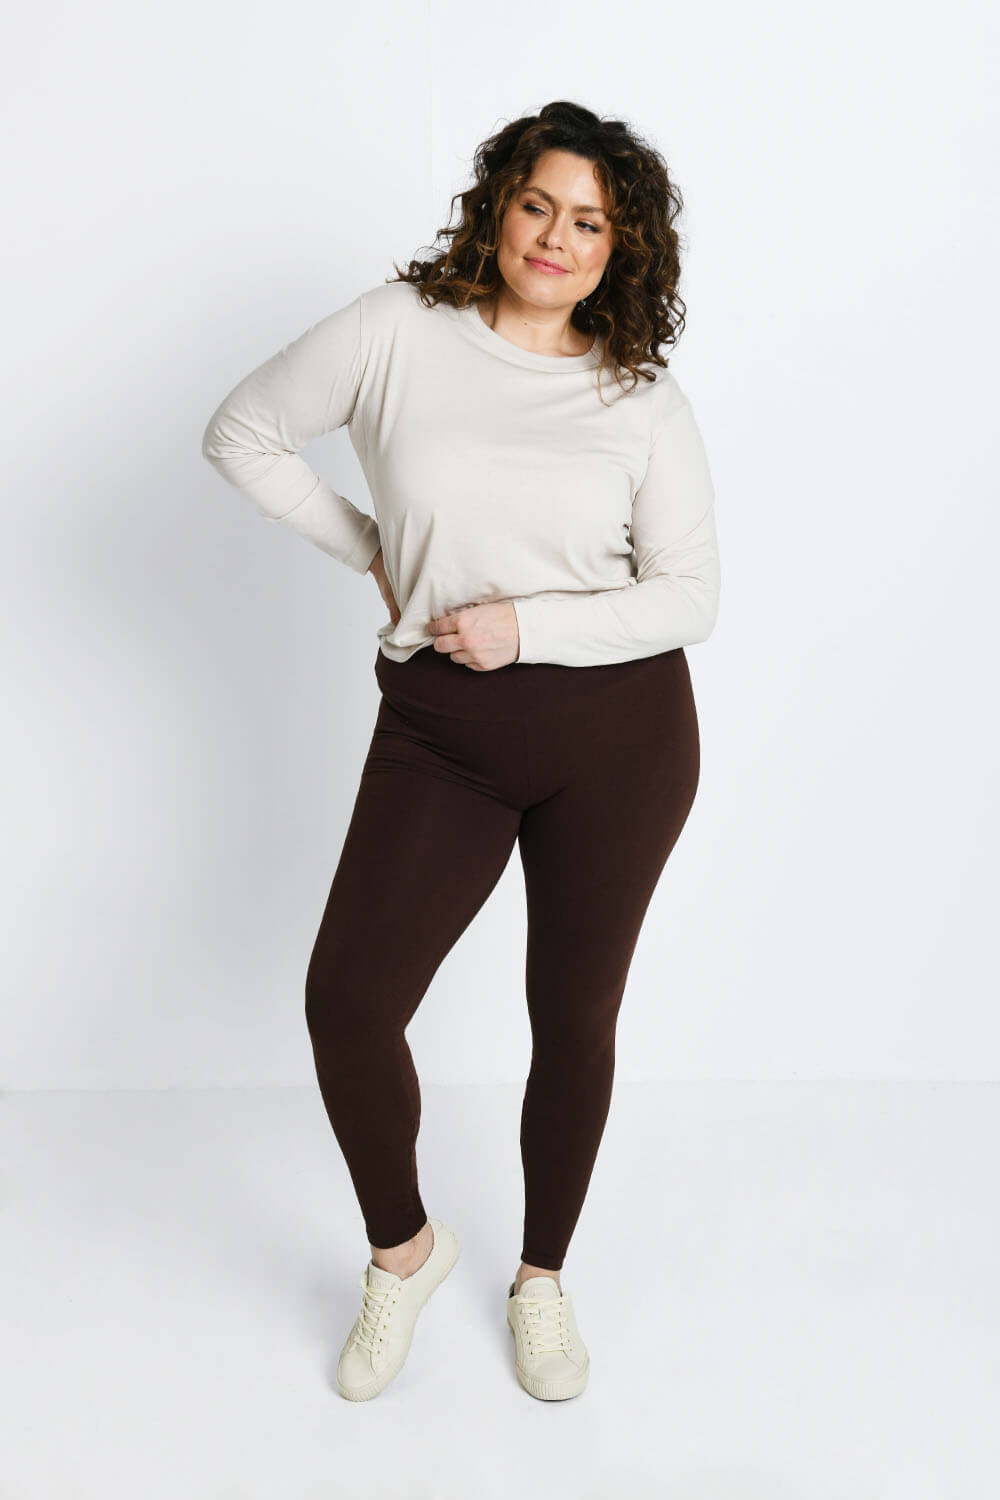 Plus Size Chocolate Brown Classic High Waisted Leggings